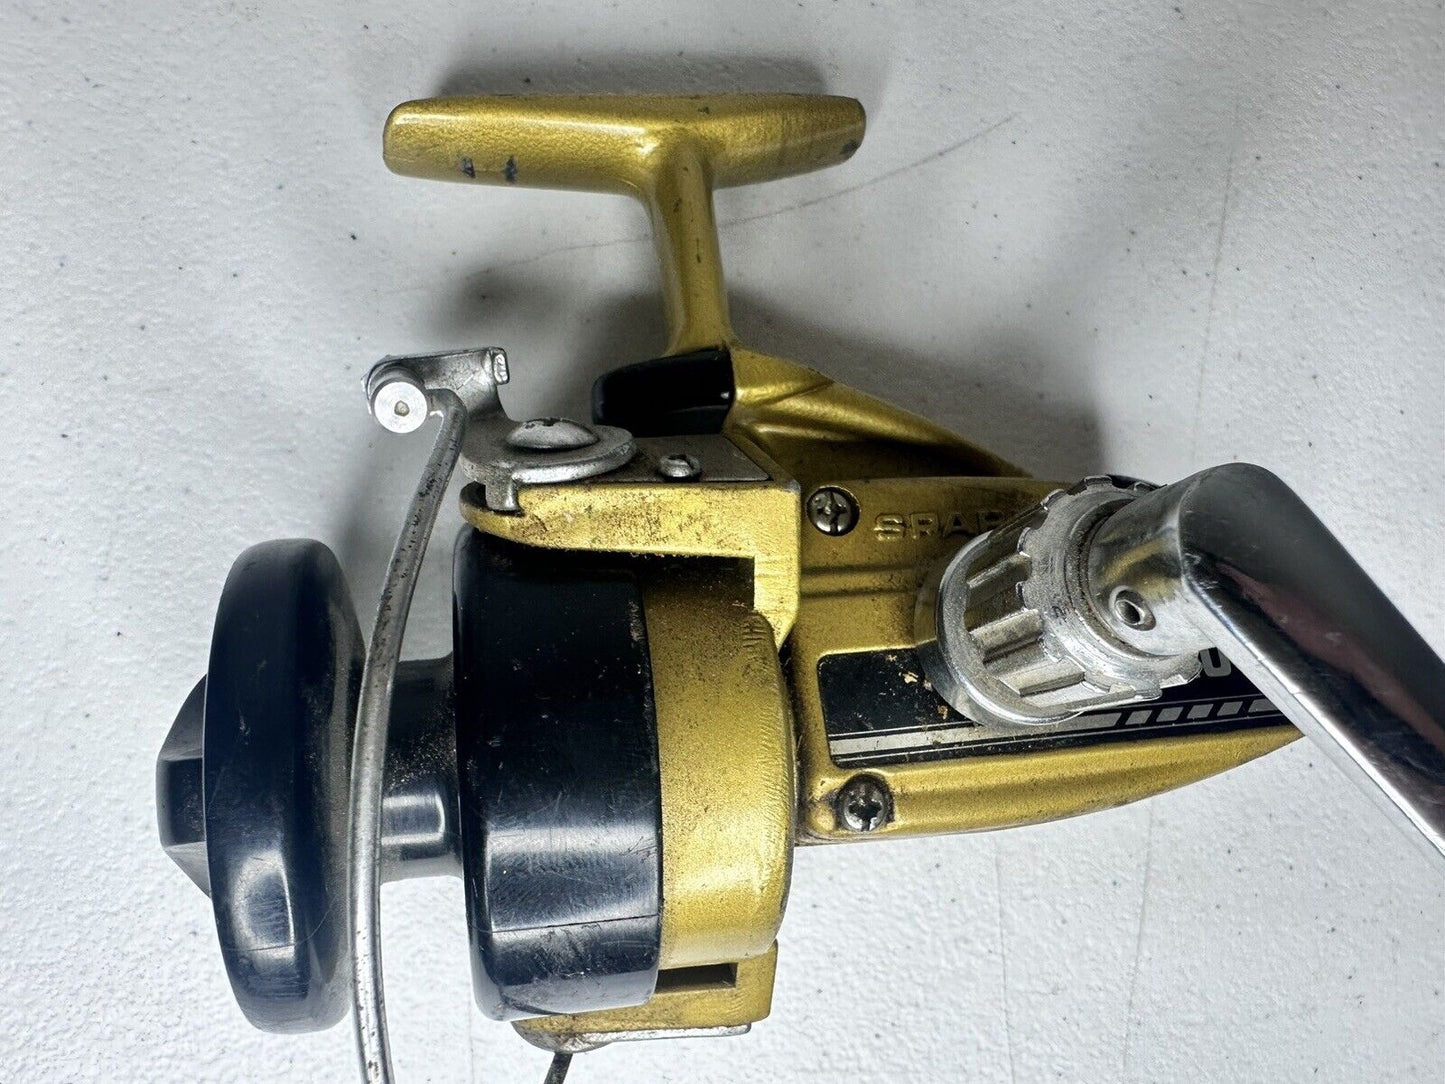 Rare Olympic Spark 3120 Vintage Gold Spinning Fishing Reel - Made in Korea - TreasuTiques